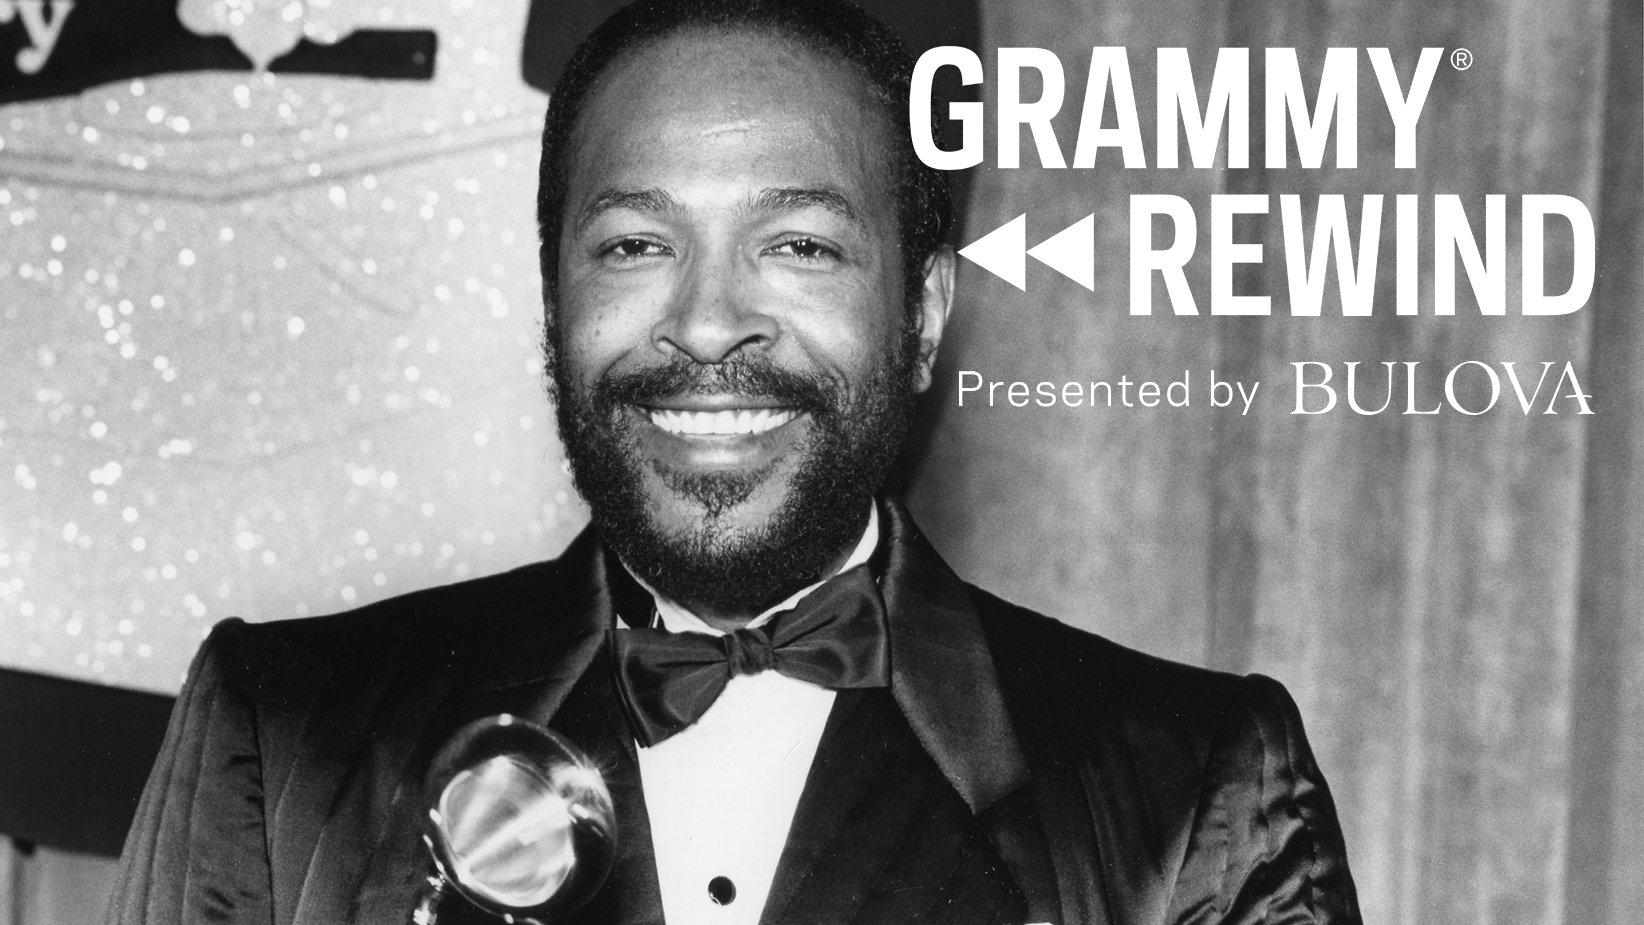 Marvin Gaye in a branded image for GRAMMY.com's GRAMMY Rewind series presented by Bulova